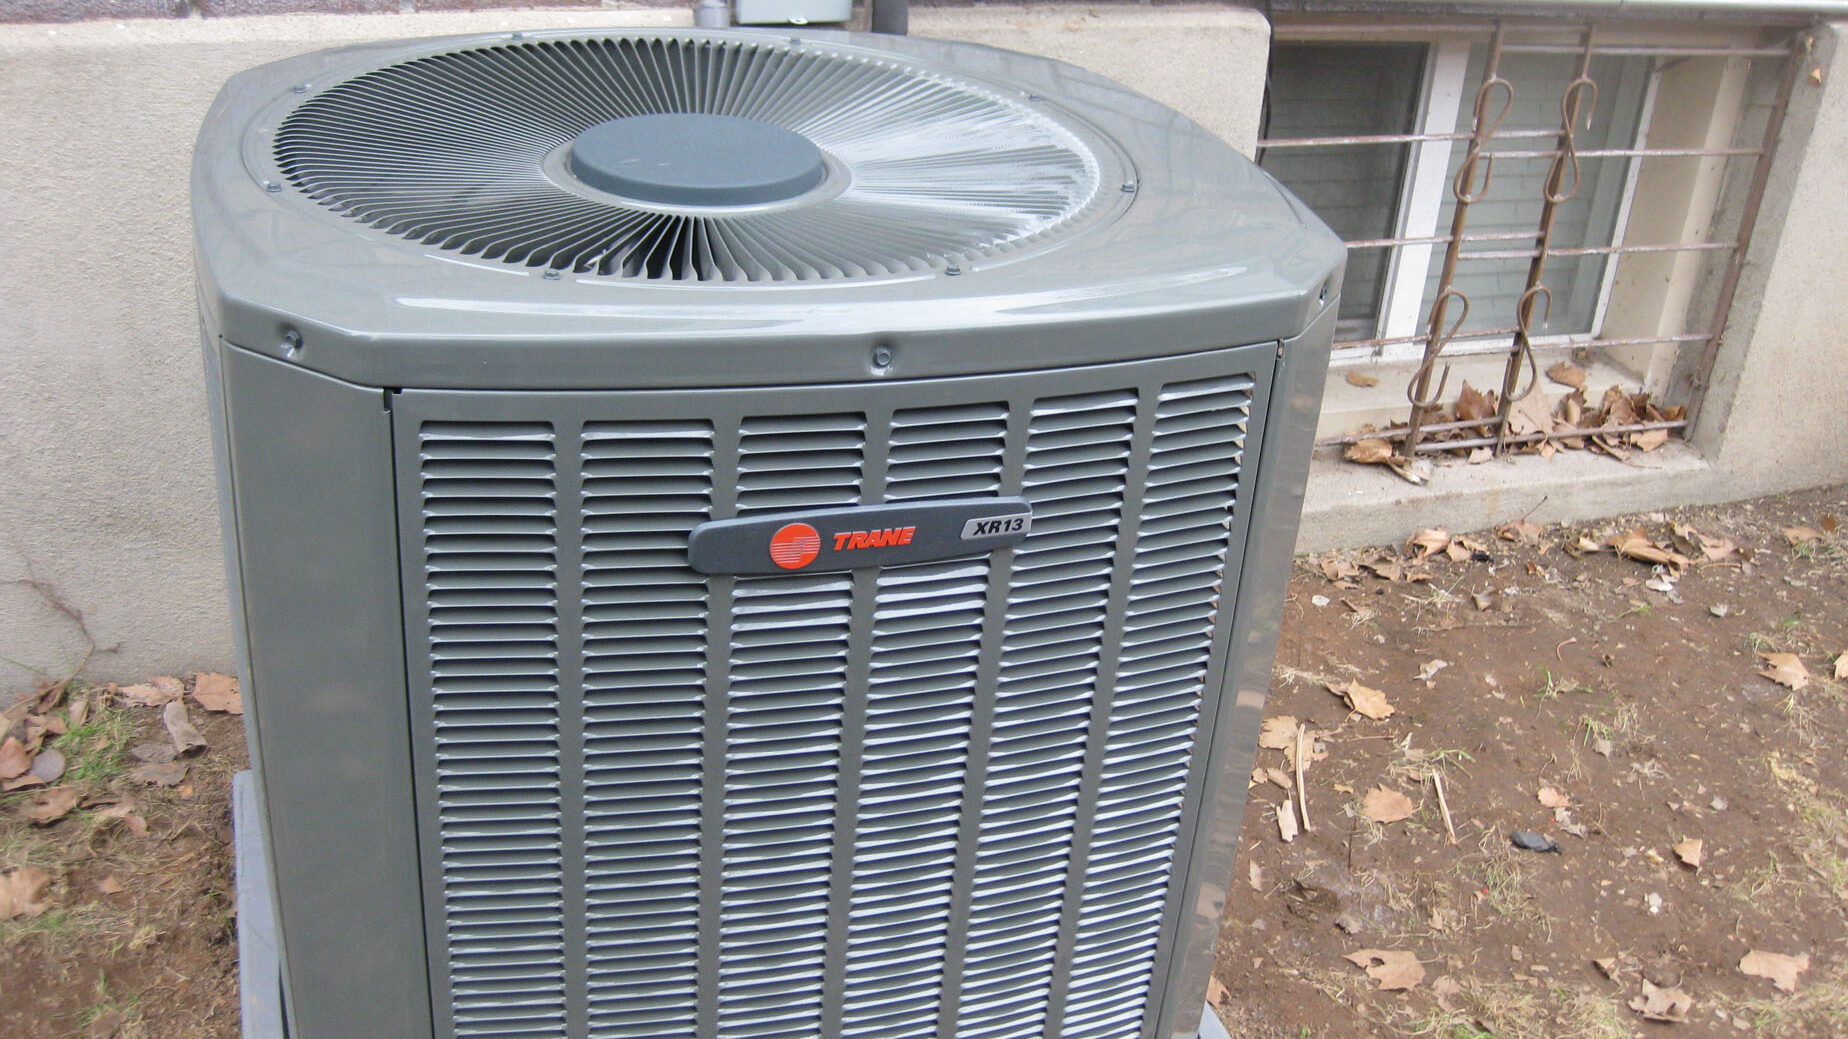 Police have arrested the person who may have been ripping out and stealing AC units and taking the ...